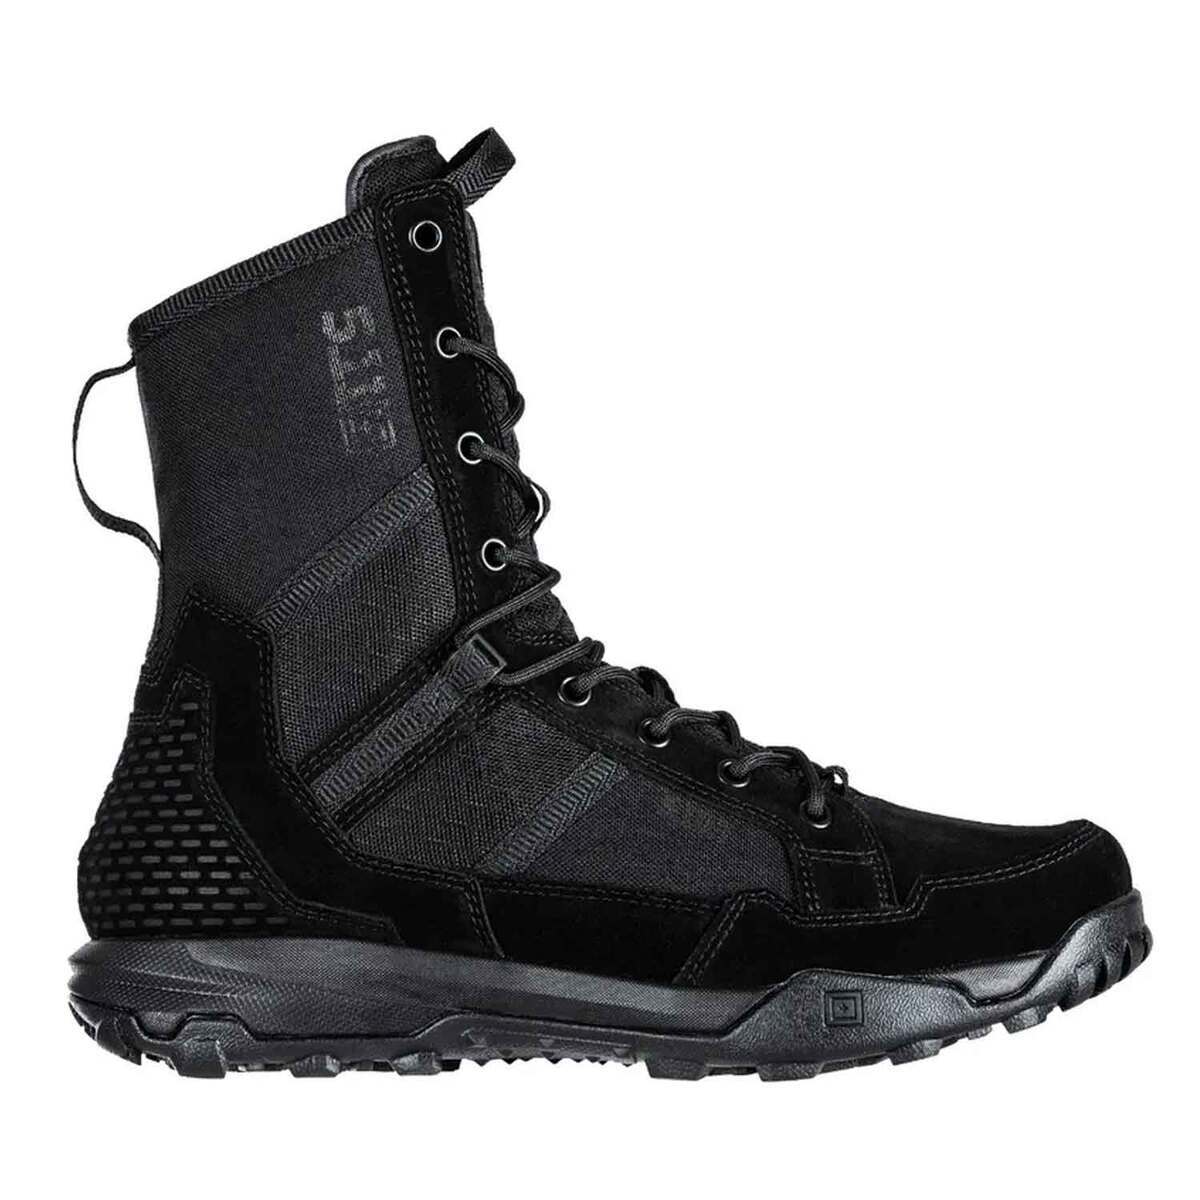 5.11 Men's A/T 8in Non-Zip Tactical Boots | Sportsman's Warehouse